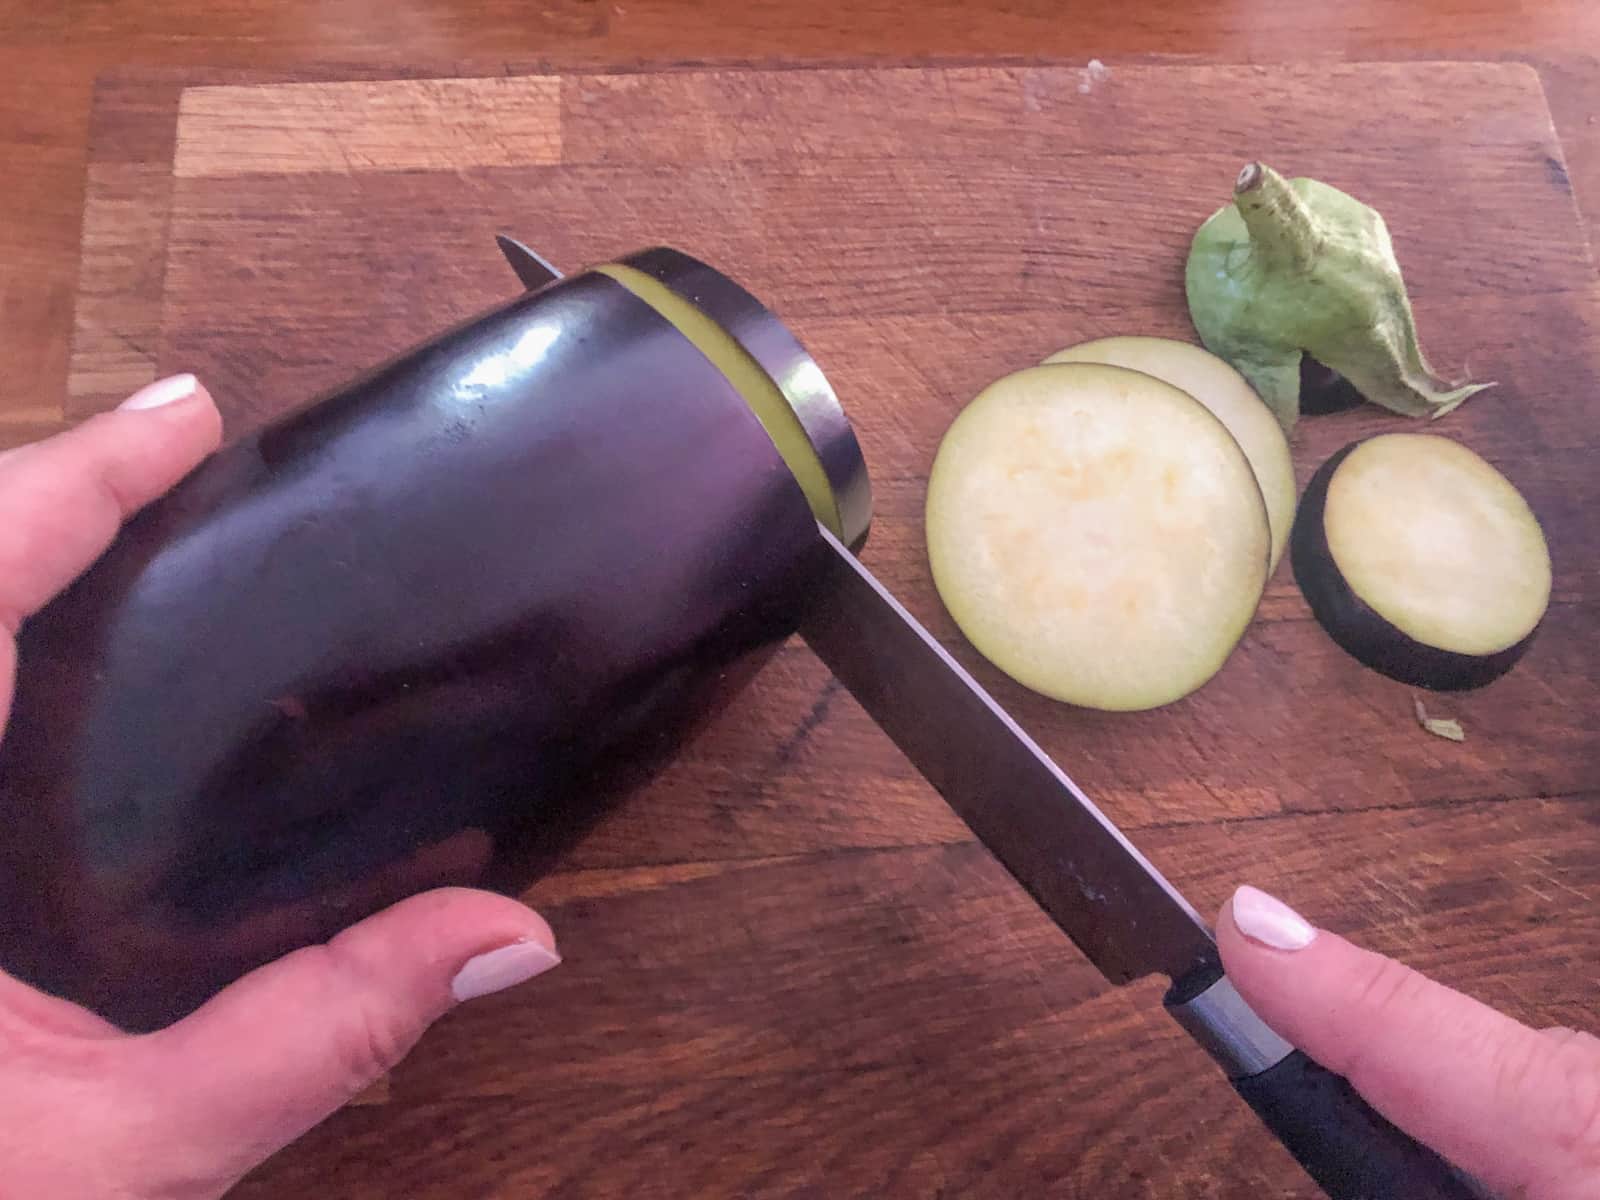 Aubergines being sliced on a wooden board